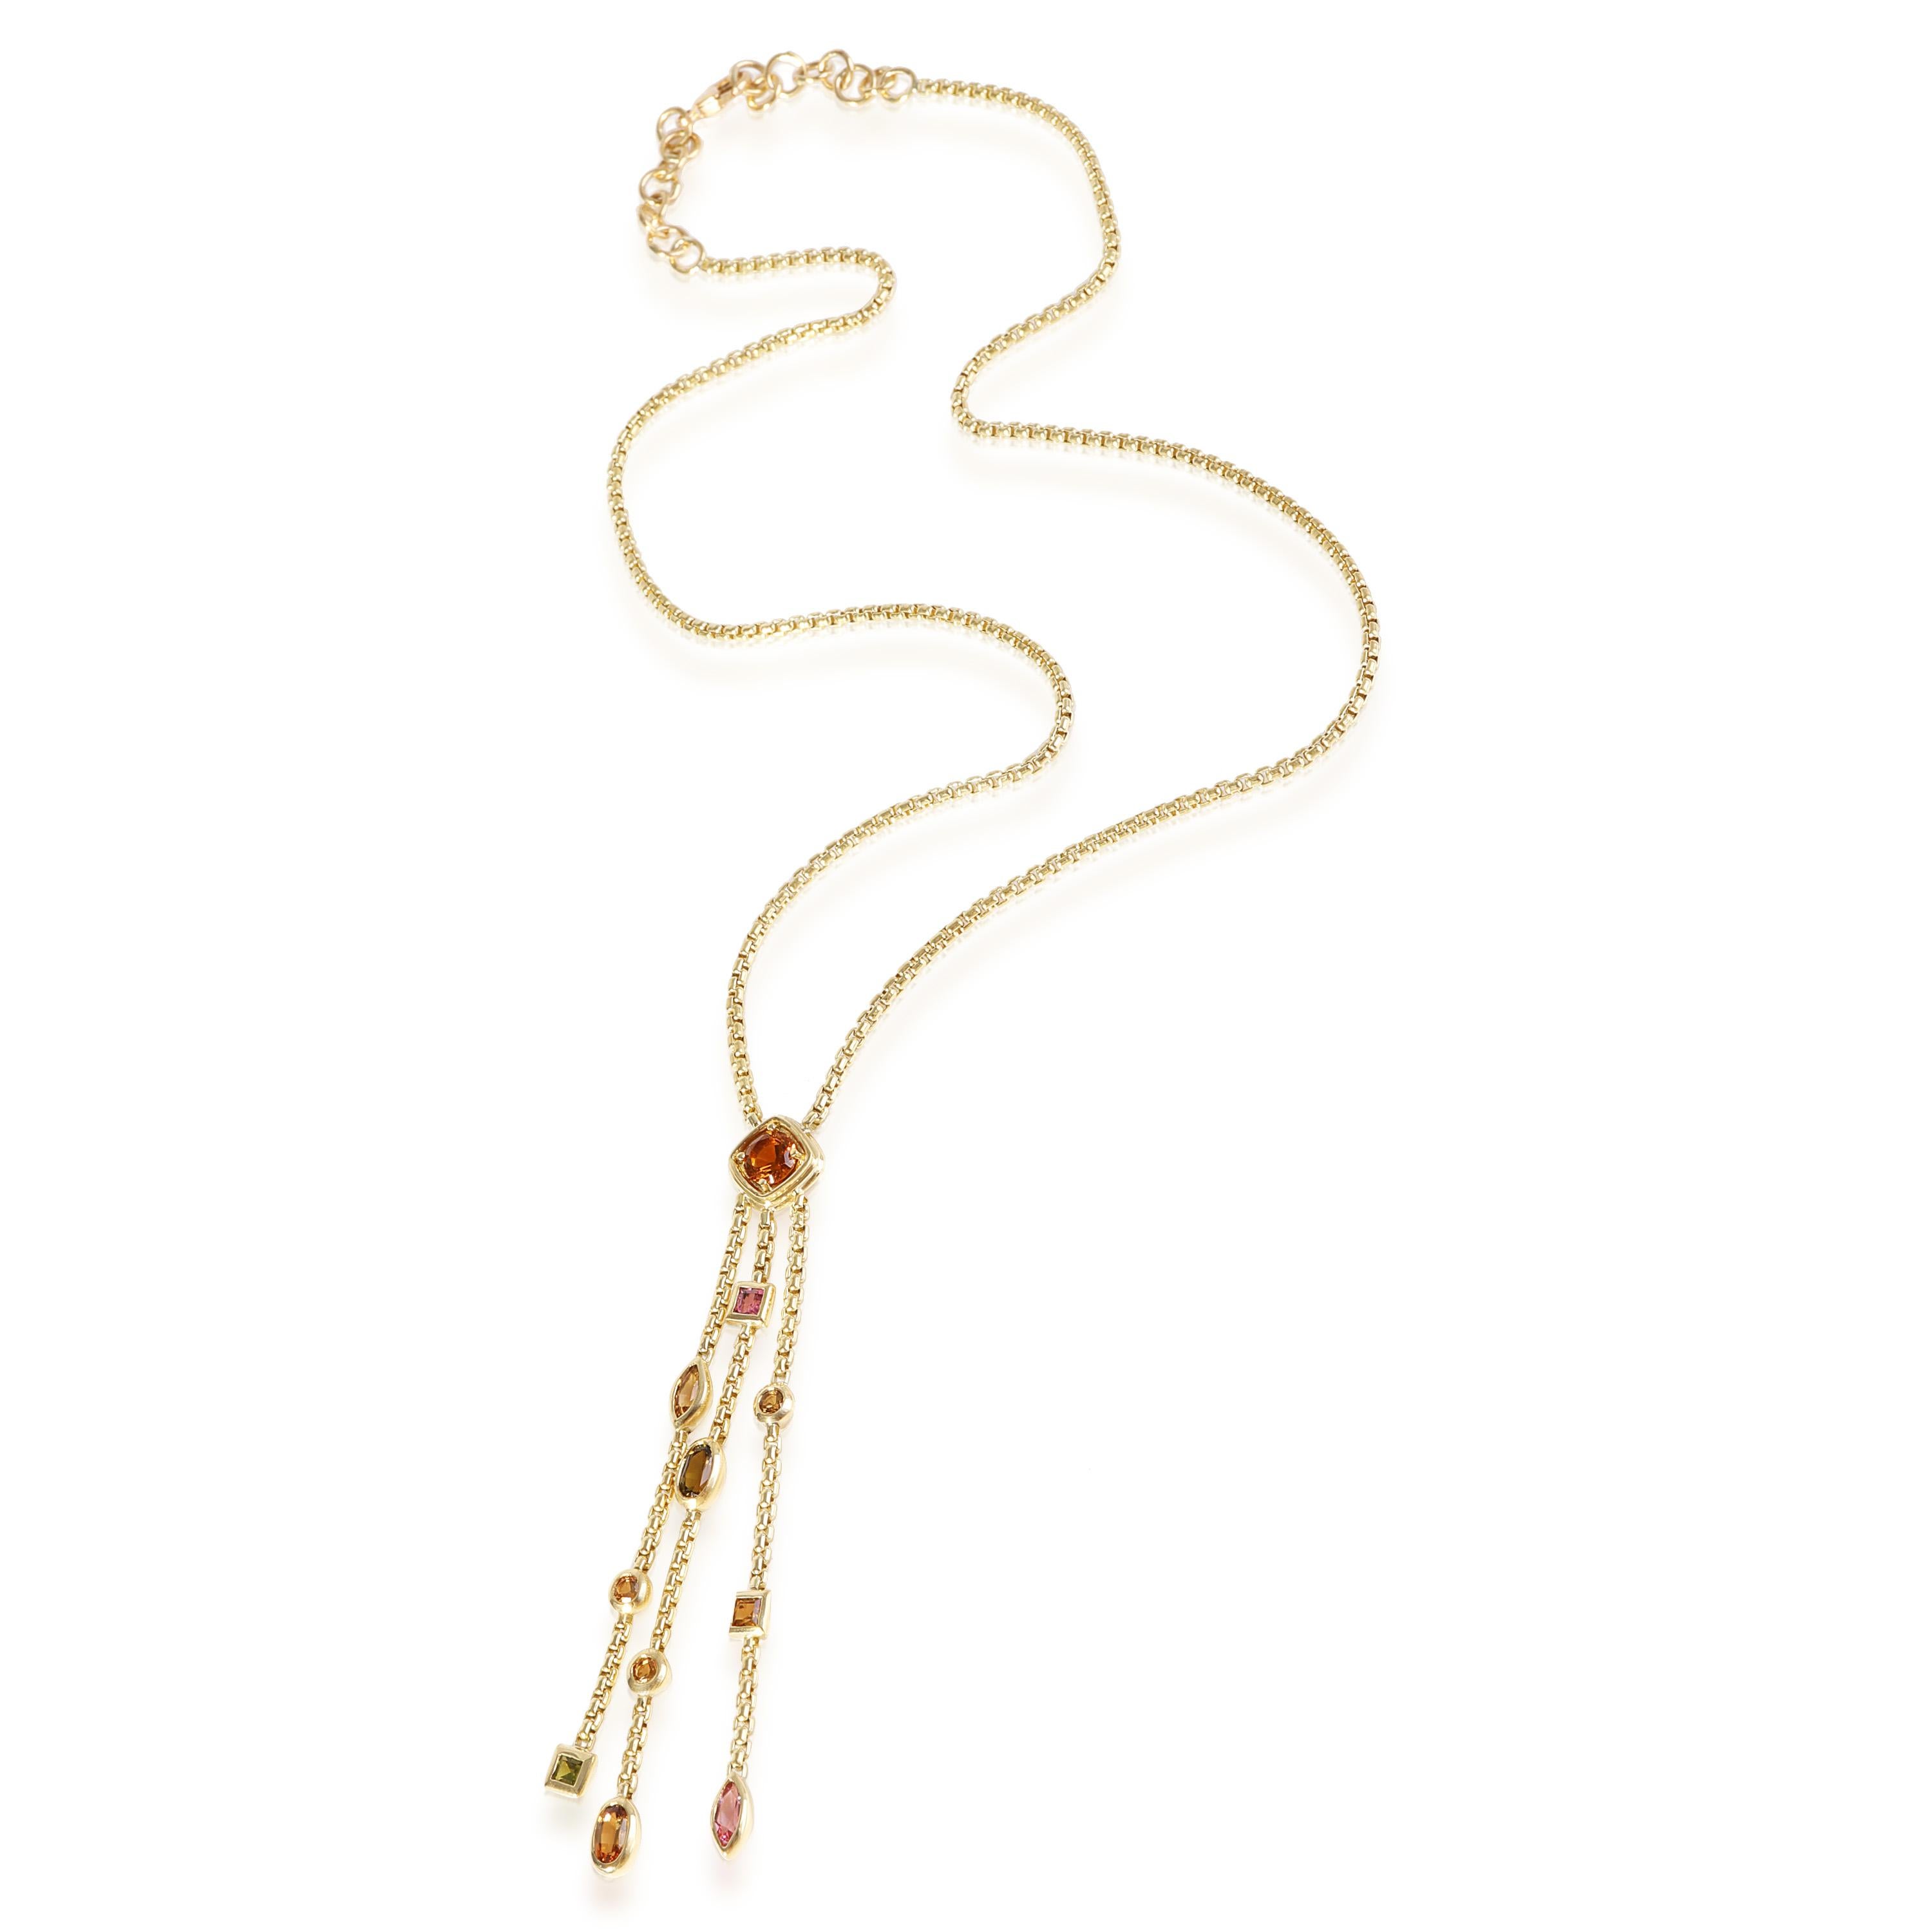 David Yurman Confetti Mix Necklace in 18k Yellow Gold

PRIMARY DETAILS
SKU: 118945
Listing Title: David Yurman Confetti Mix Necklace in 18k Yellow Gold
Condition Description: Retails for 3500 USD. In excellent condition and recently polished. Chain